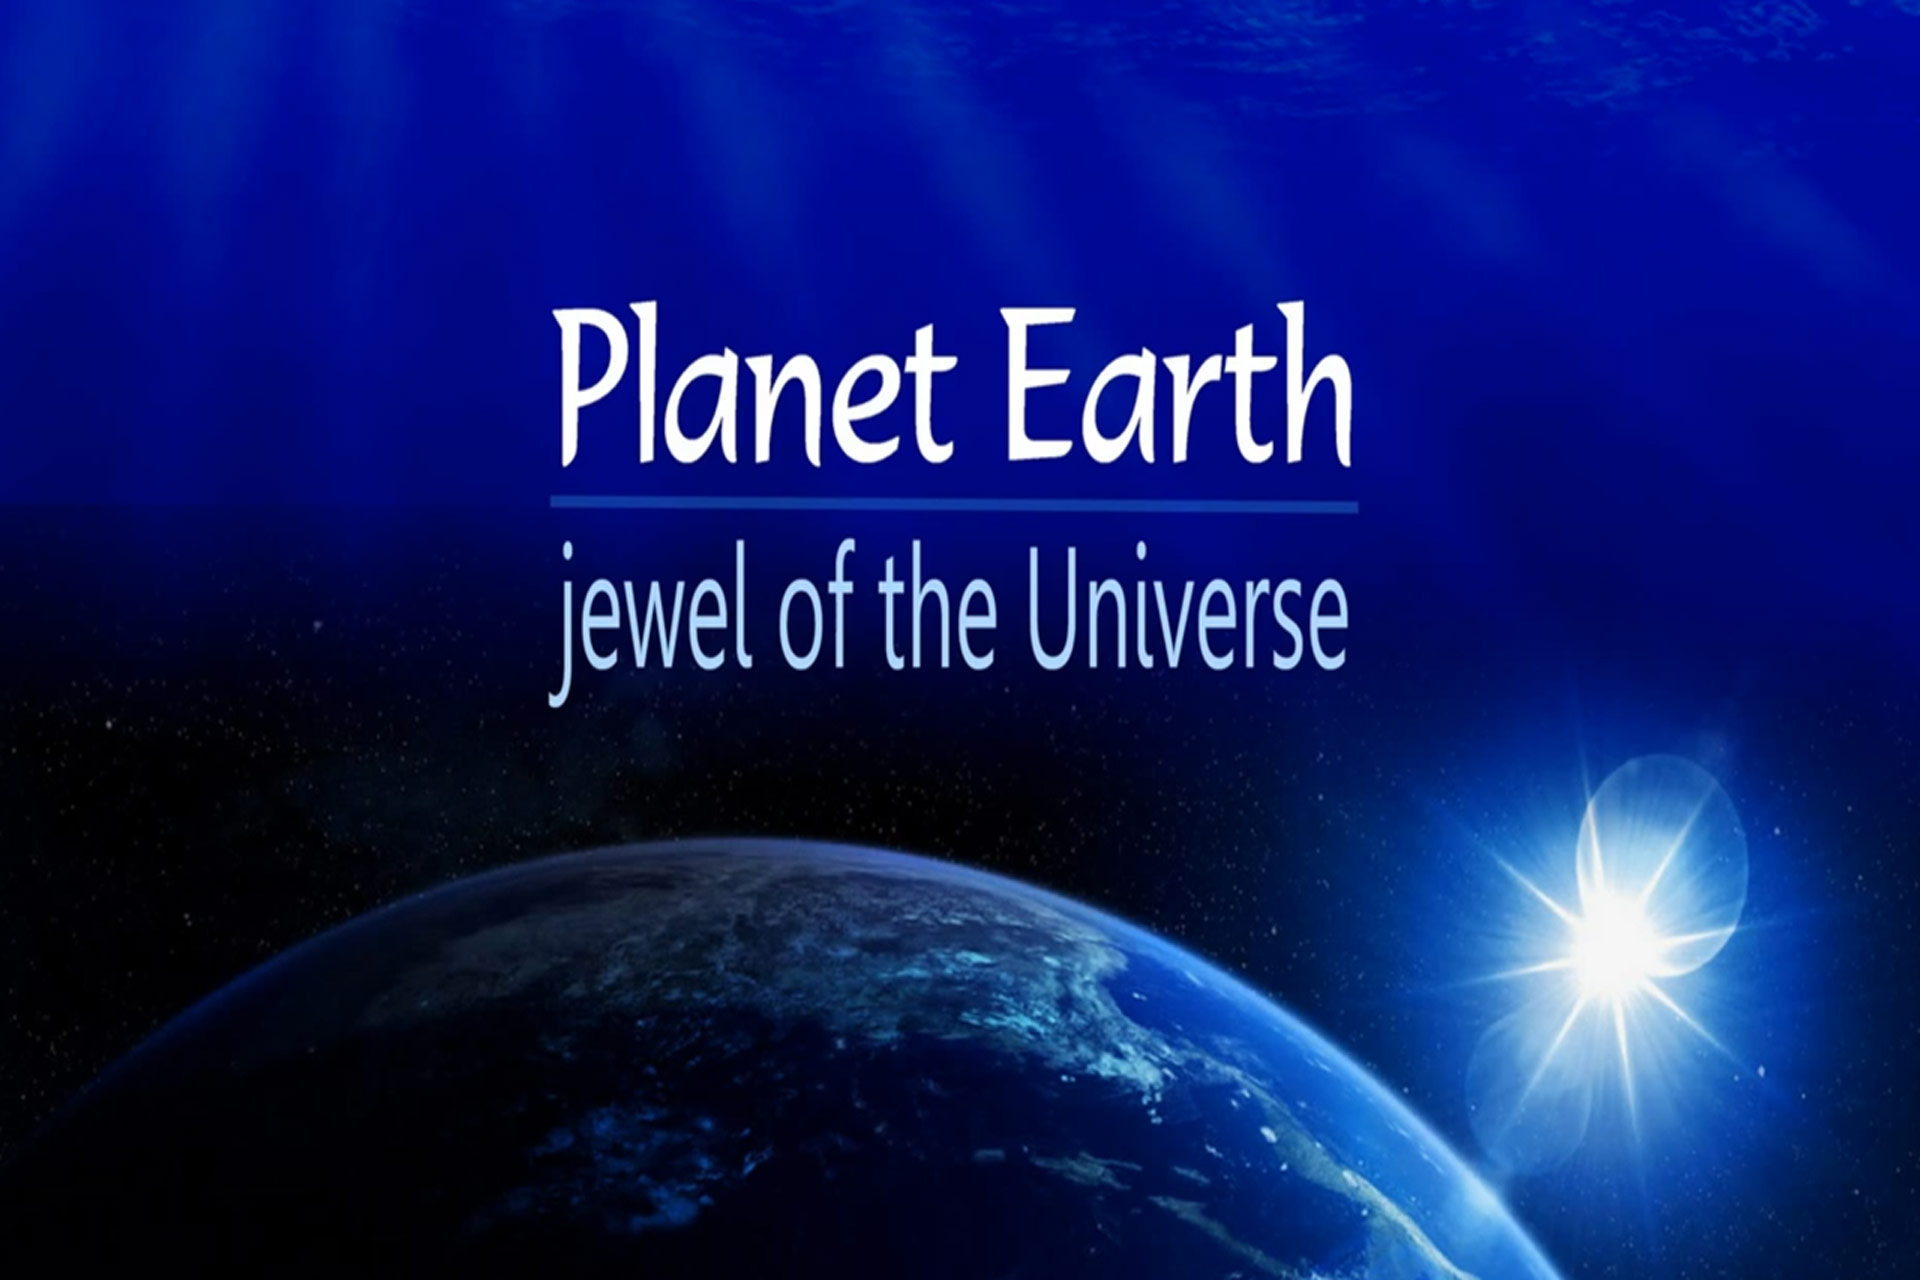 Planet Earth, jewel of the Universe